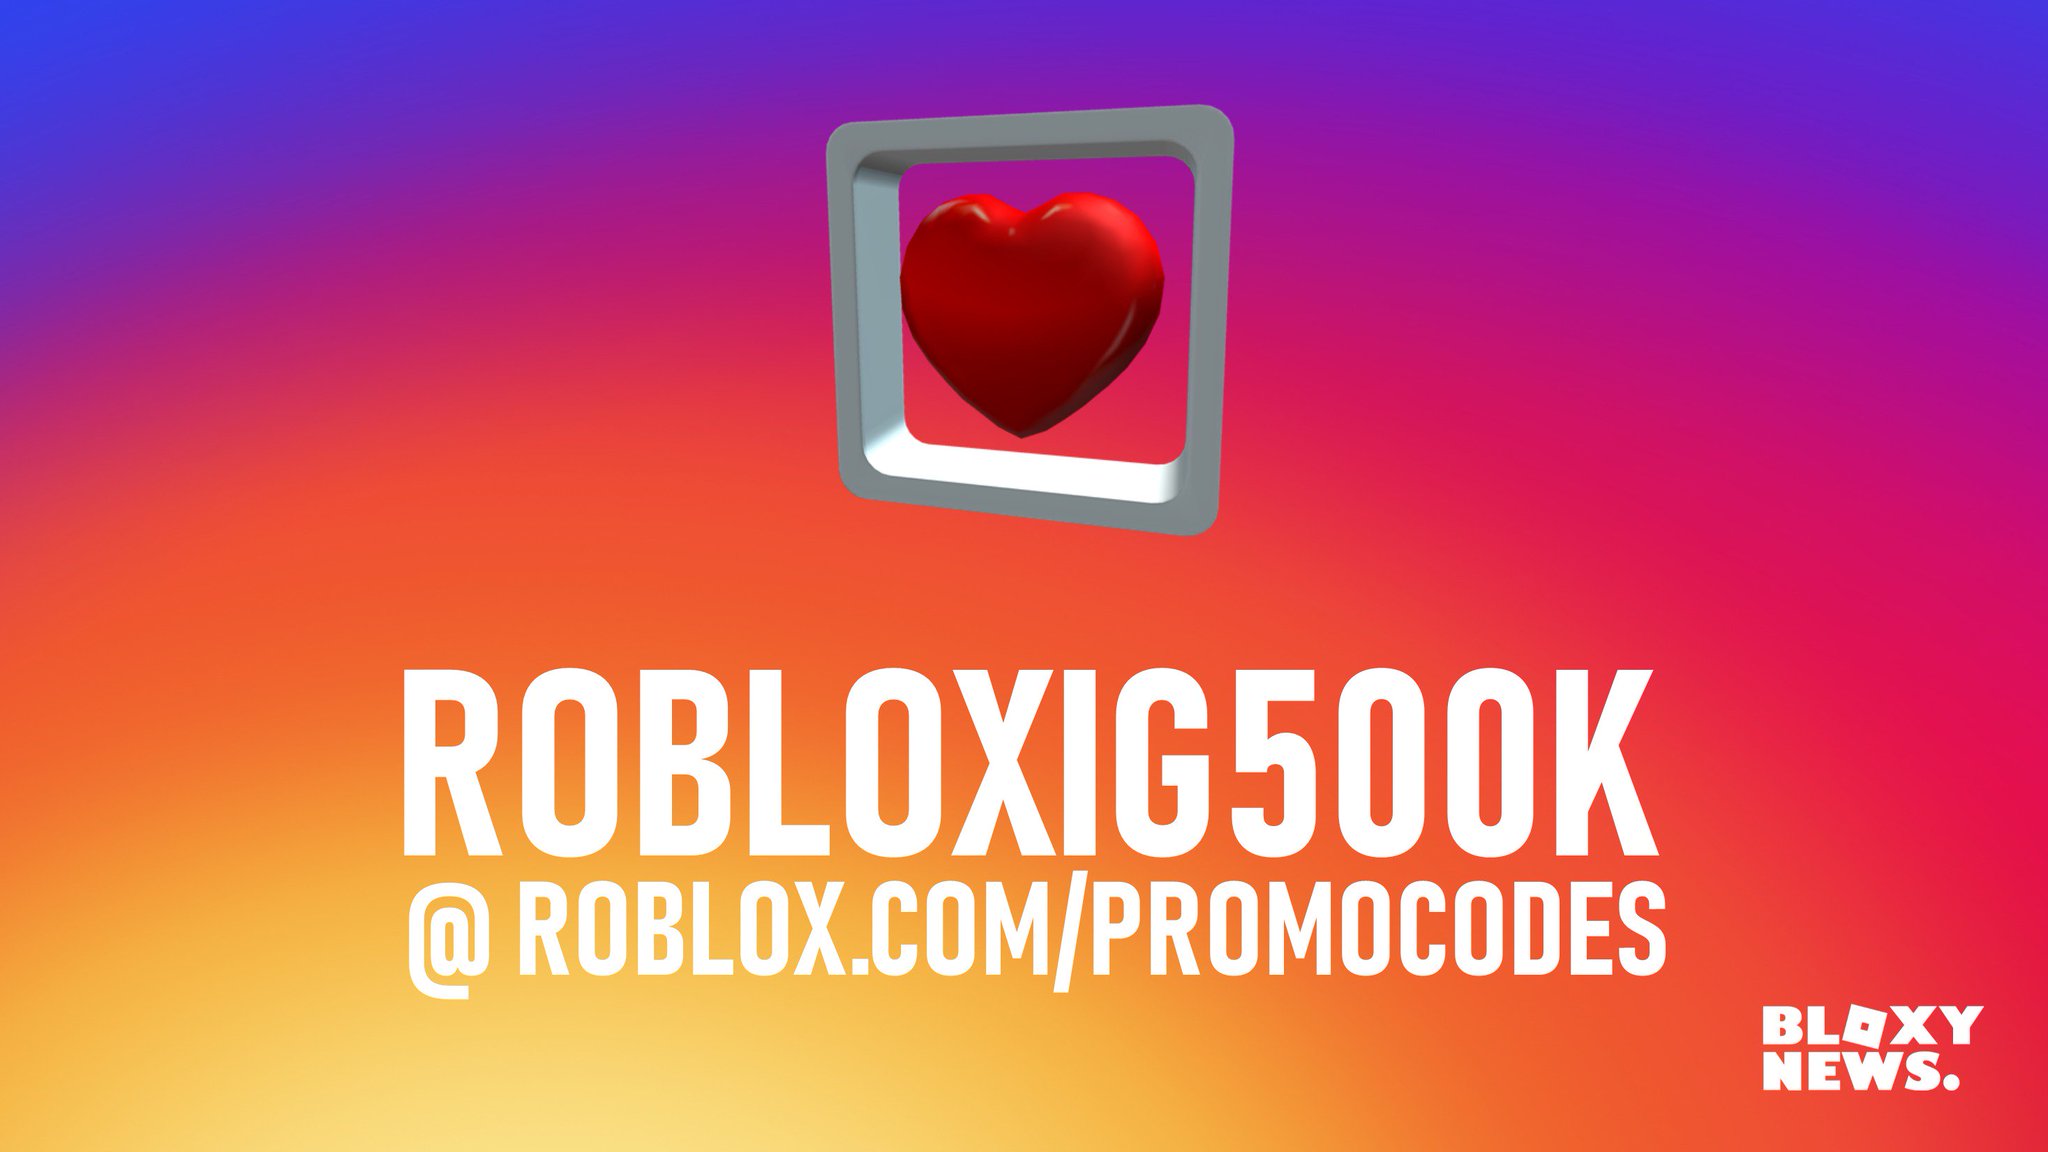 Bloxy News On Twitter Bloxynews Roblox Just Hit 500k Followers On Instagram To Celebrate Head To Https T Co 7qvdjgejbm And Enter The Code Robloxig500k To Receive The Hovering Heart Follow Roblox Https T Co Jafpwutg6w Https T Co